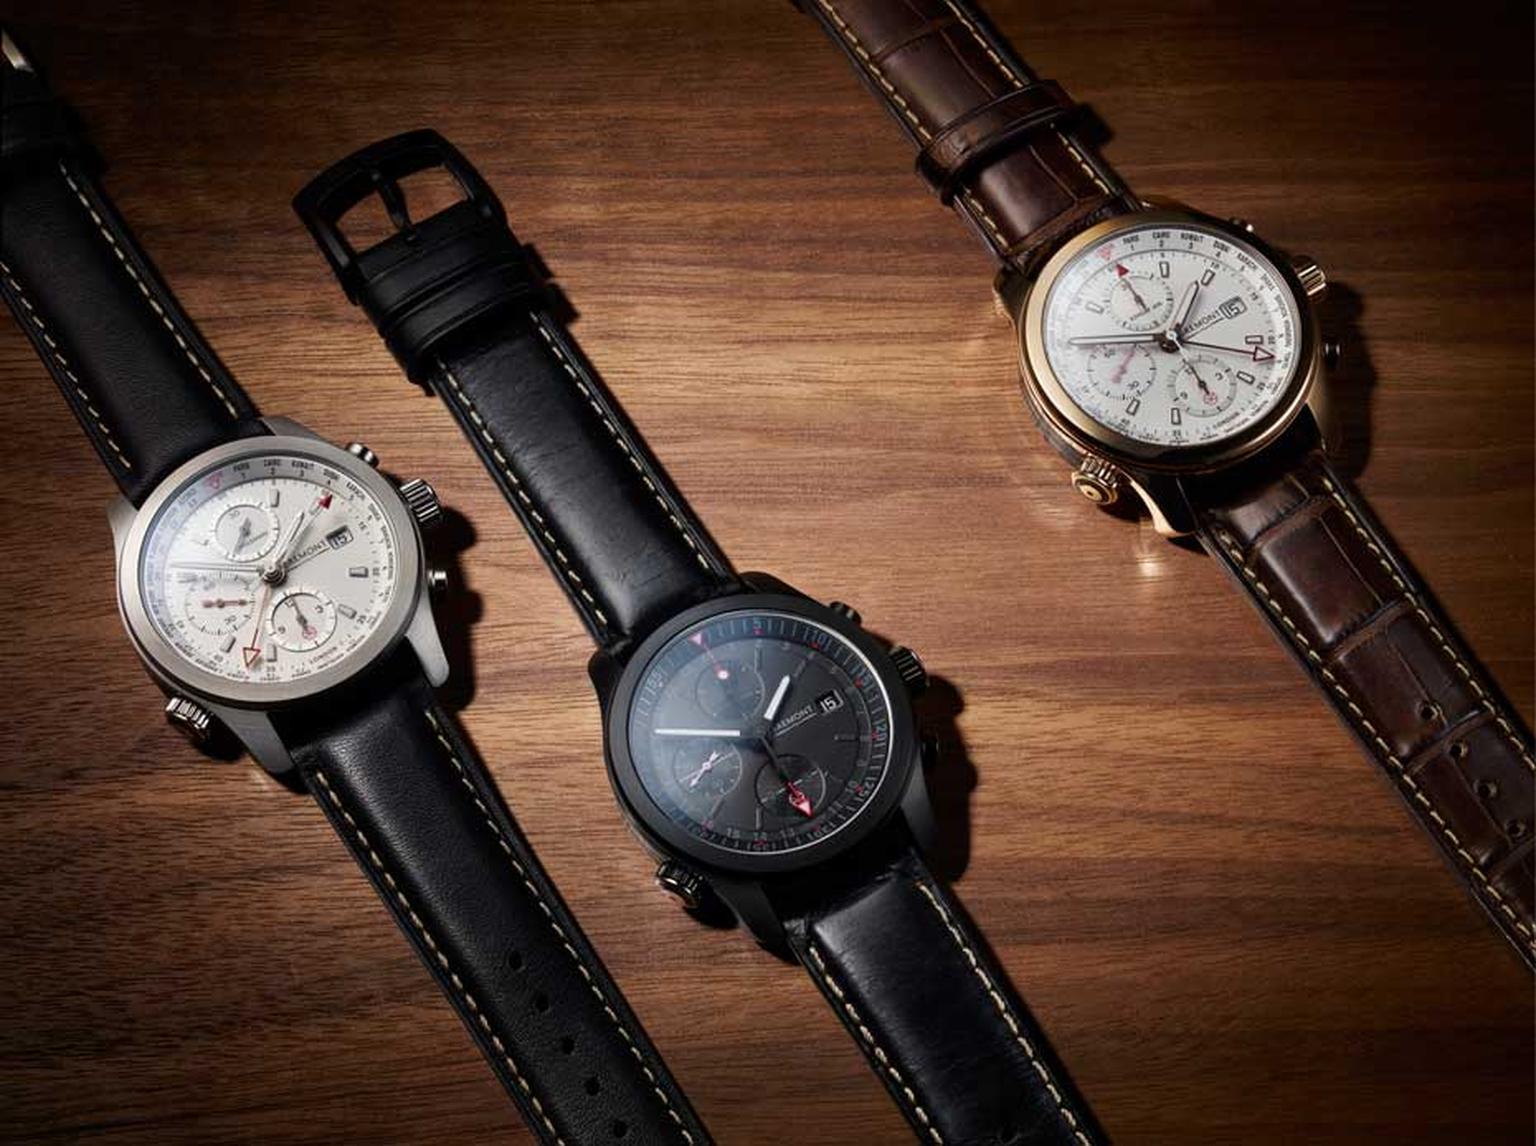 The Bremont Kingsman Special edition watch comes in rose gold, stainless steel and a black DLC coated model.